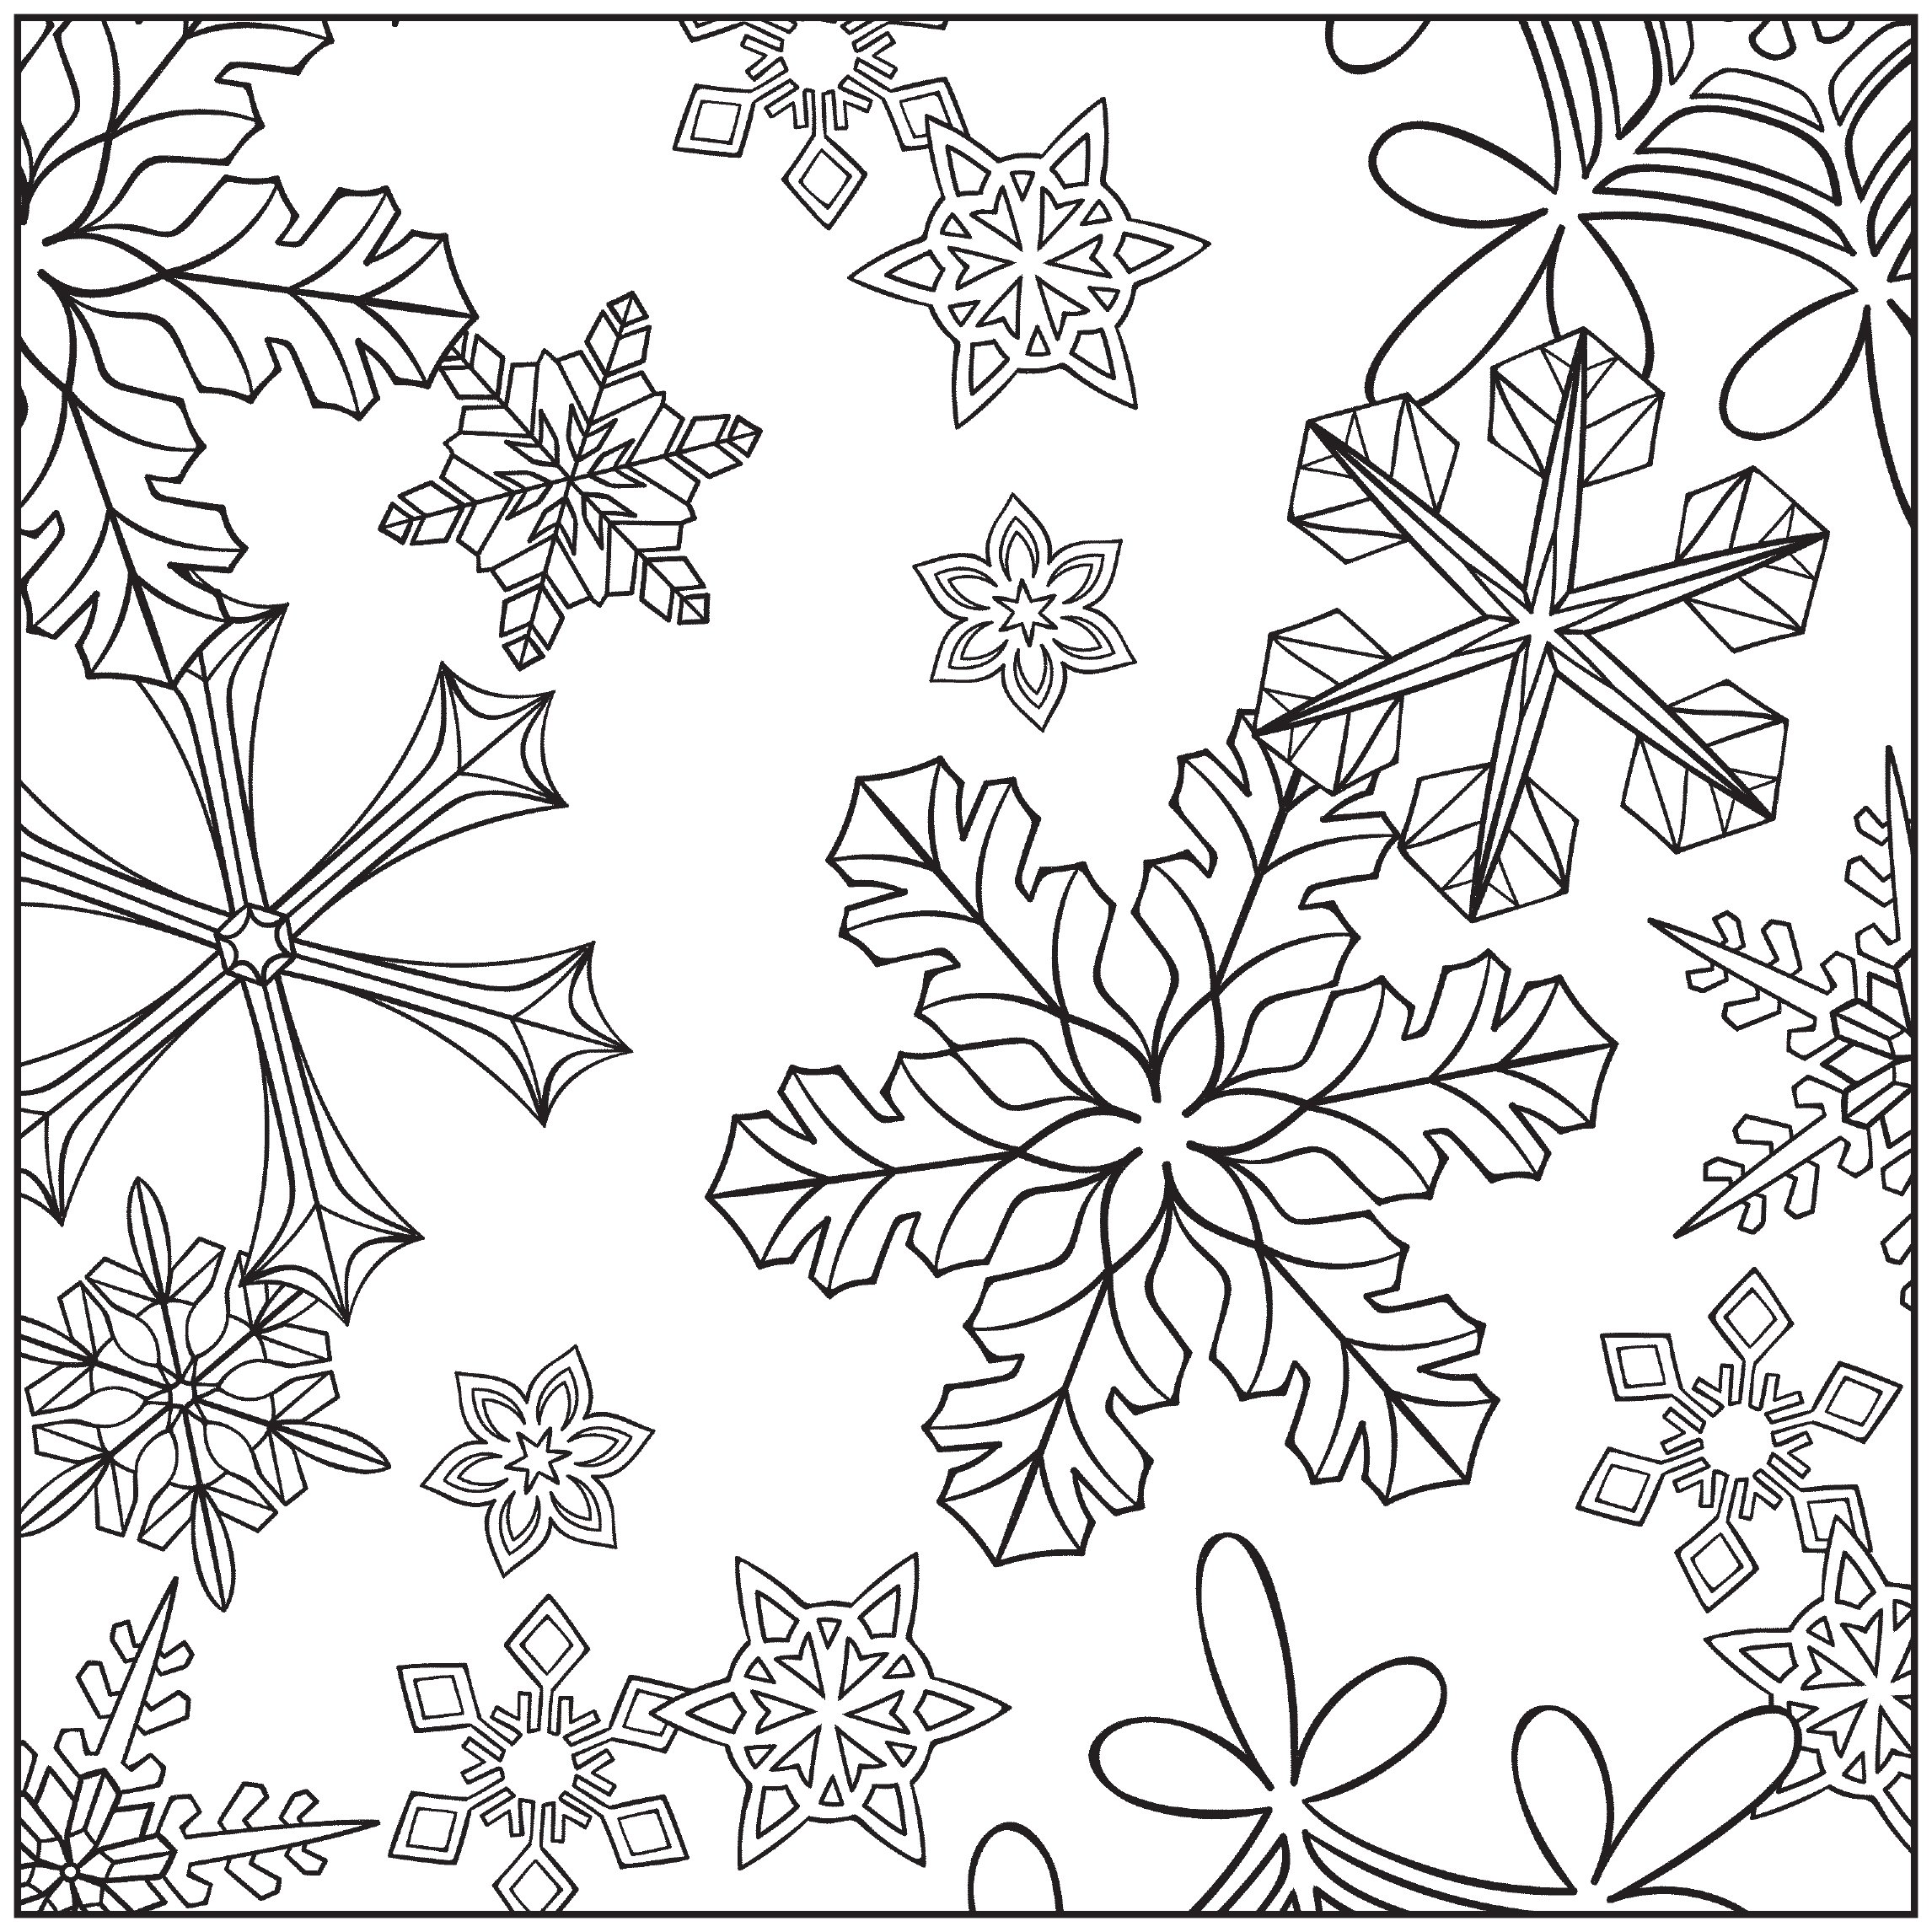 Download Winter Coloring Pages for Adults - Best Coloring Pages For ...